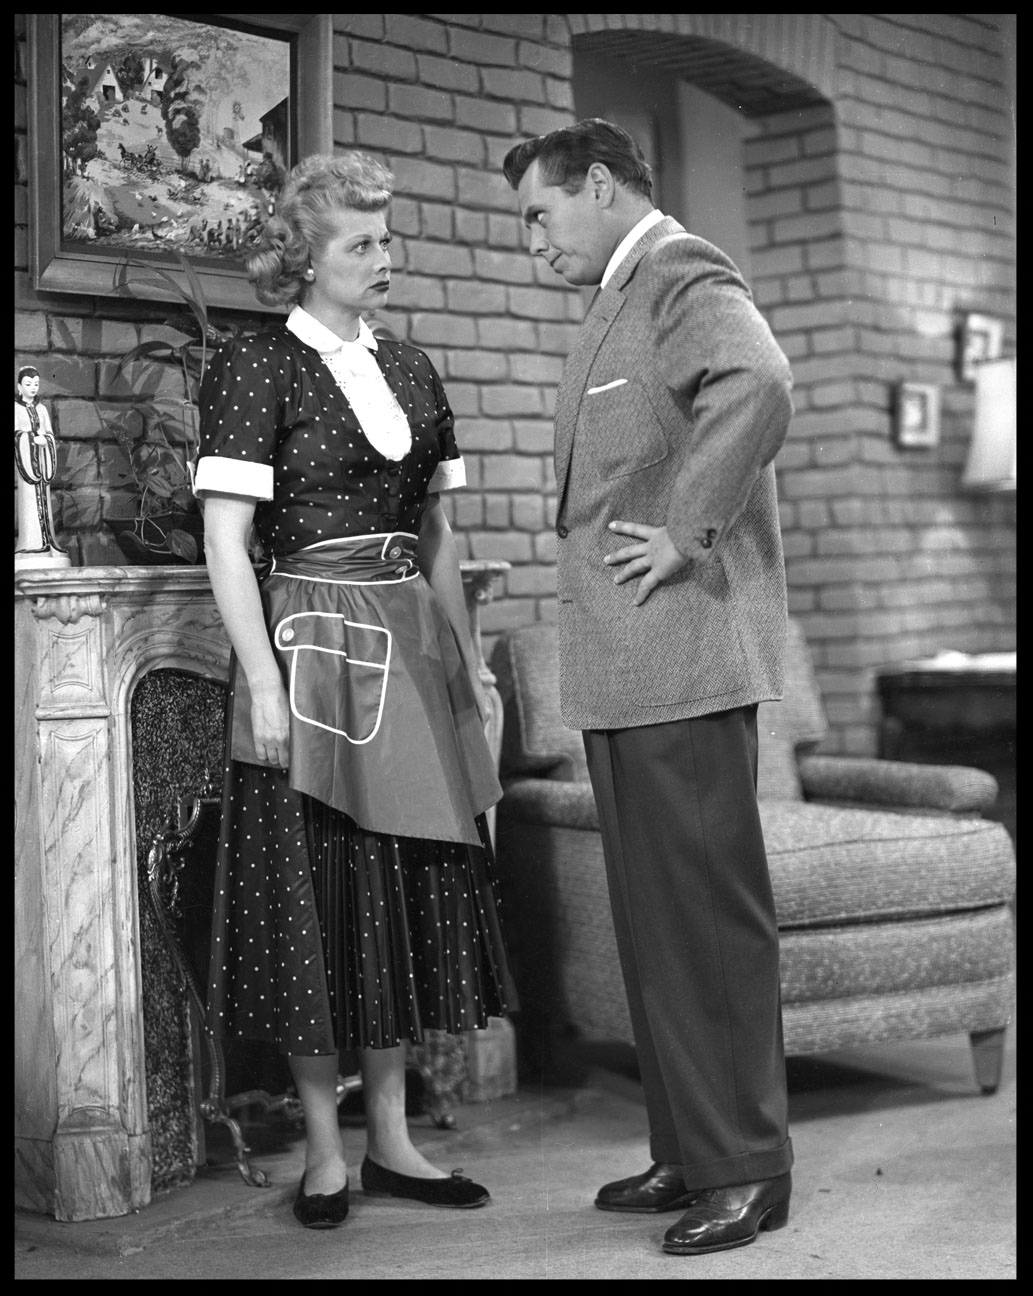 Lucille Ball & Desi Arnaz, At It Again, from The I Love Lucy Show c.1956 from original 4x5 negative